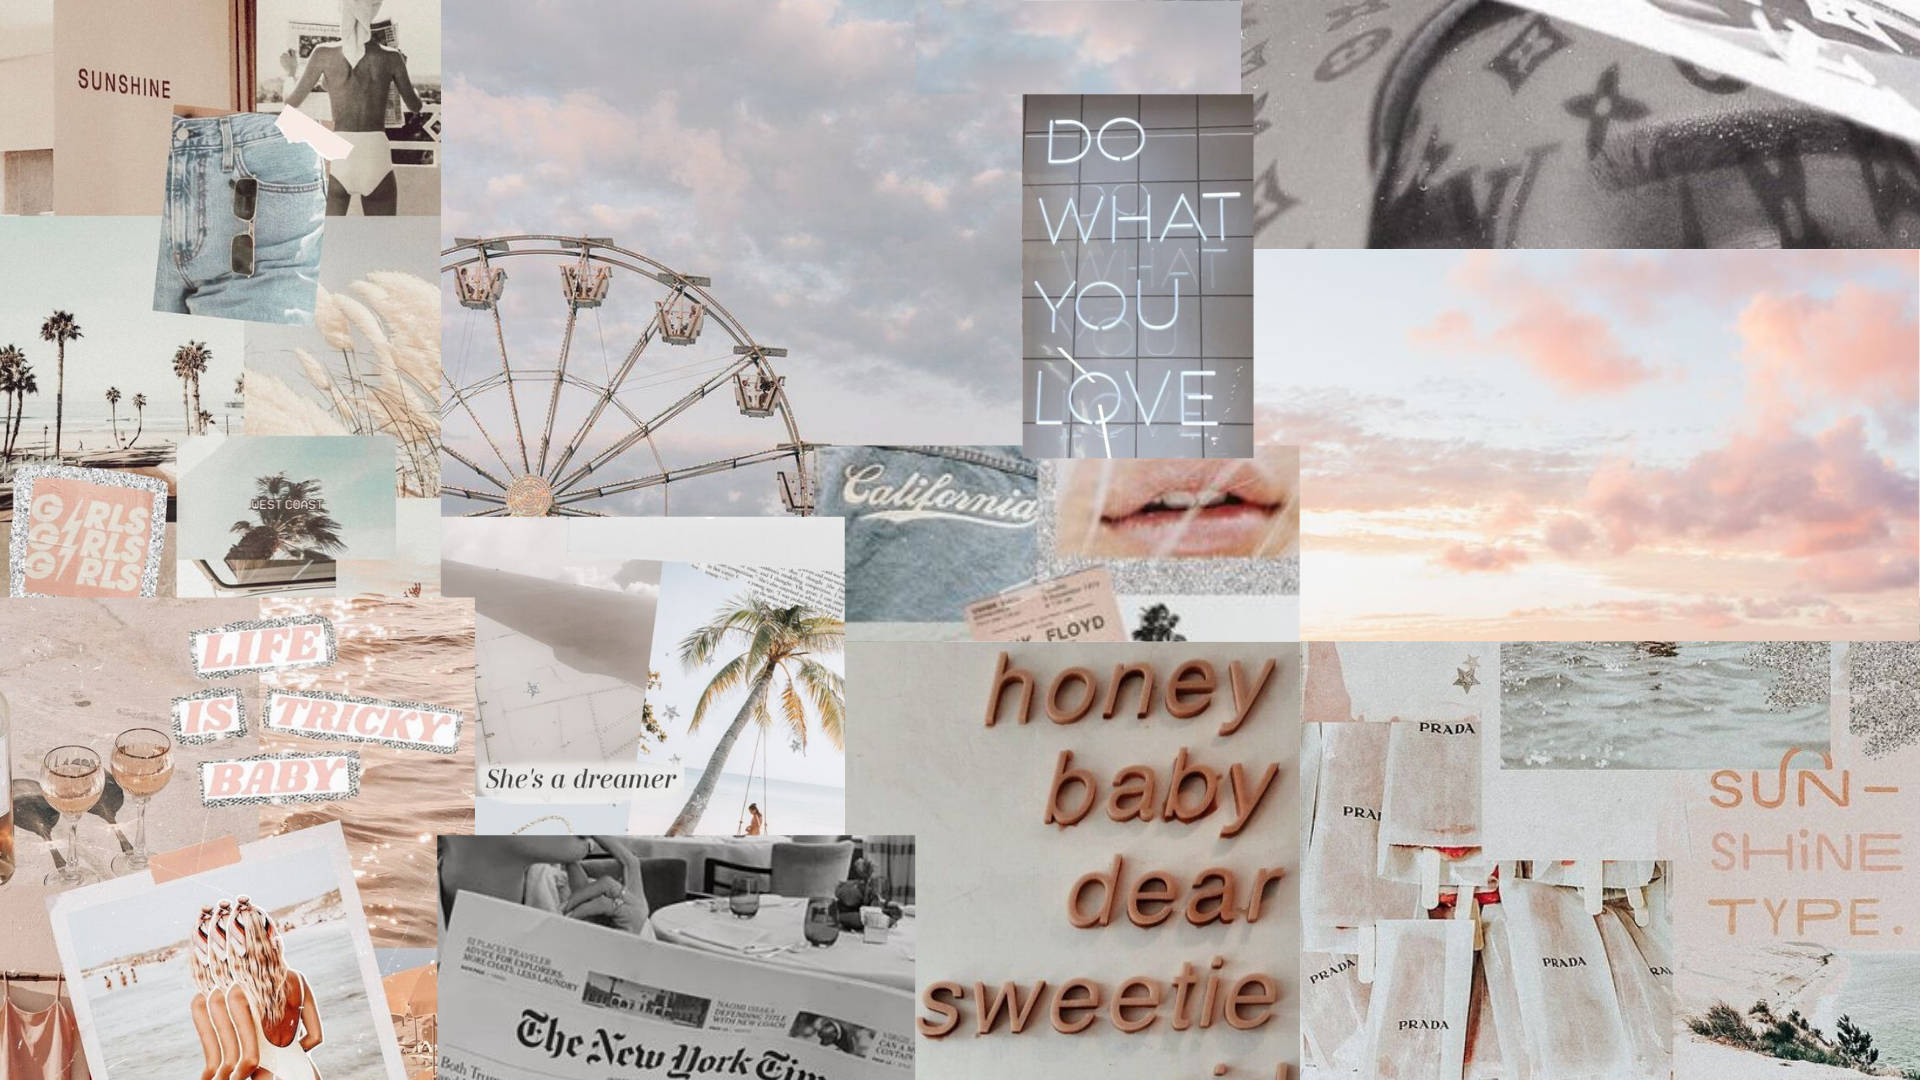 A Collage Of Photos And Text With A Beach Theme